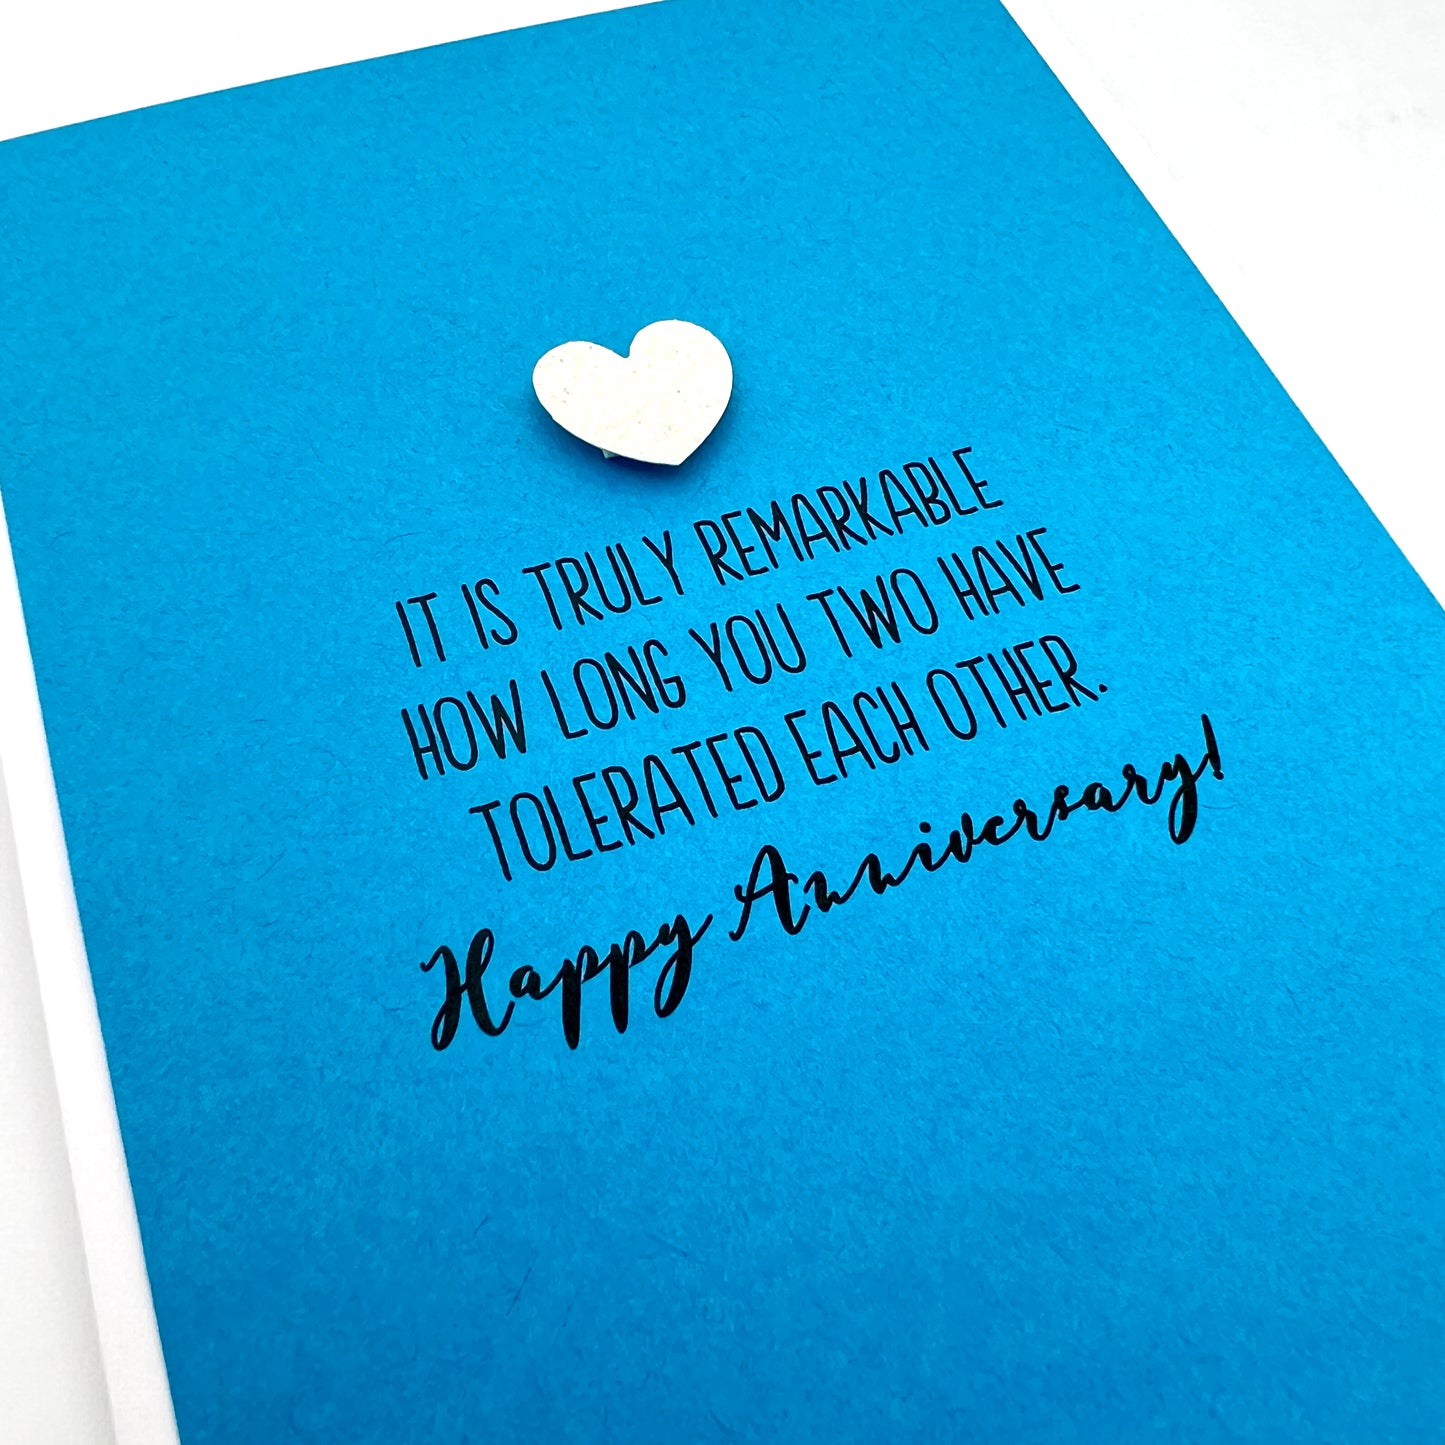 How Long You Tolerated Each Other card